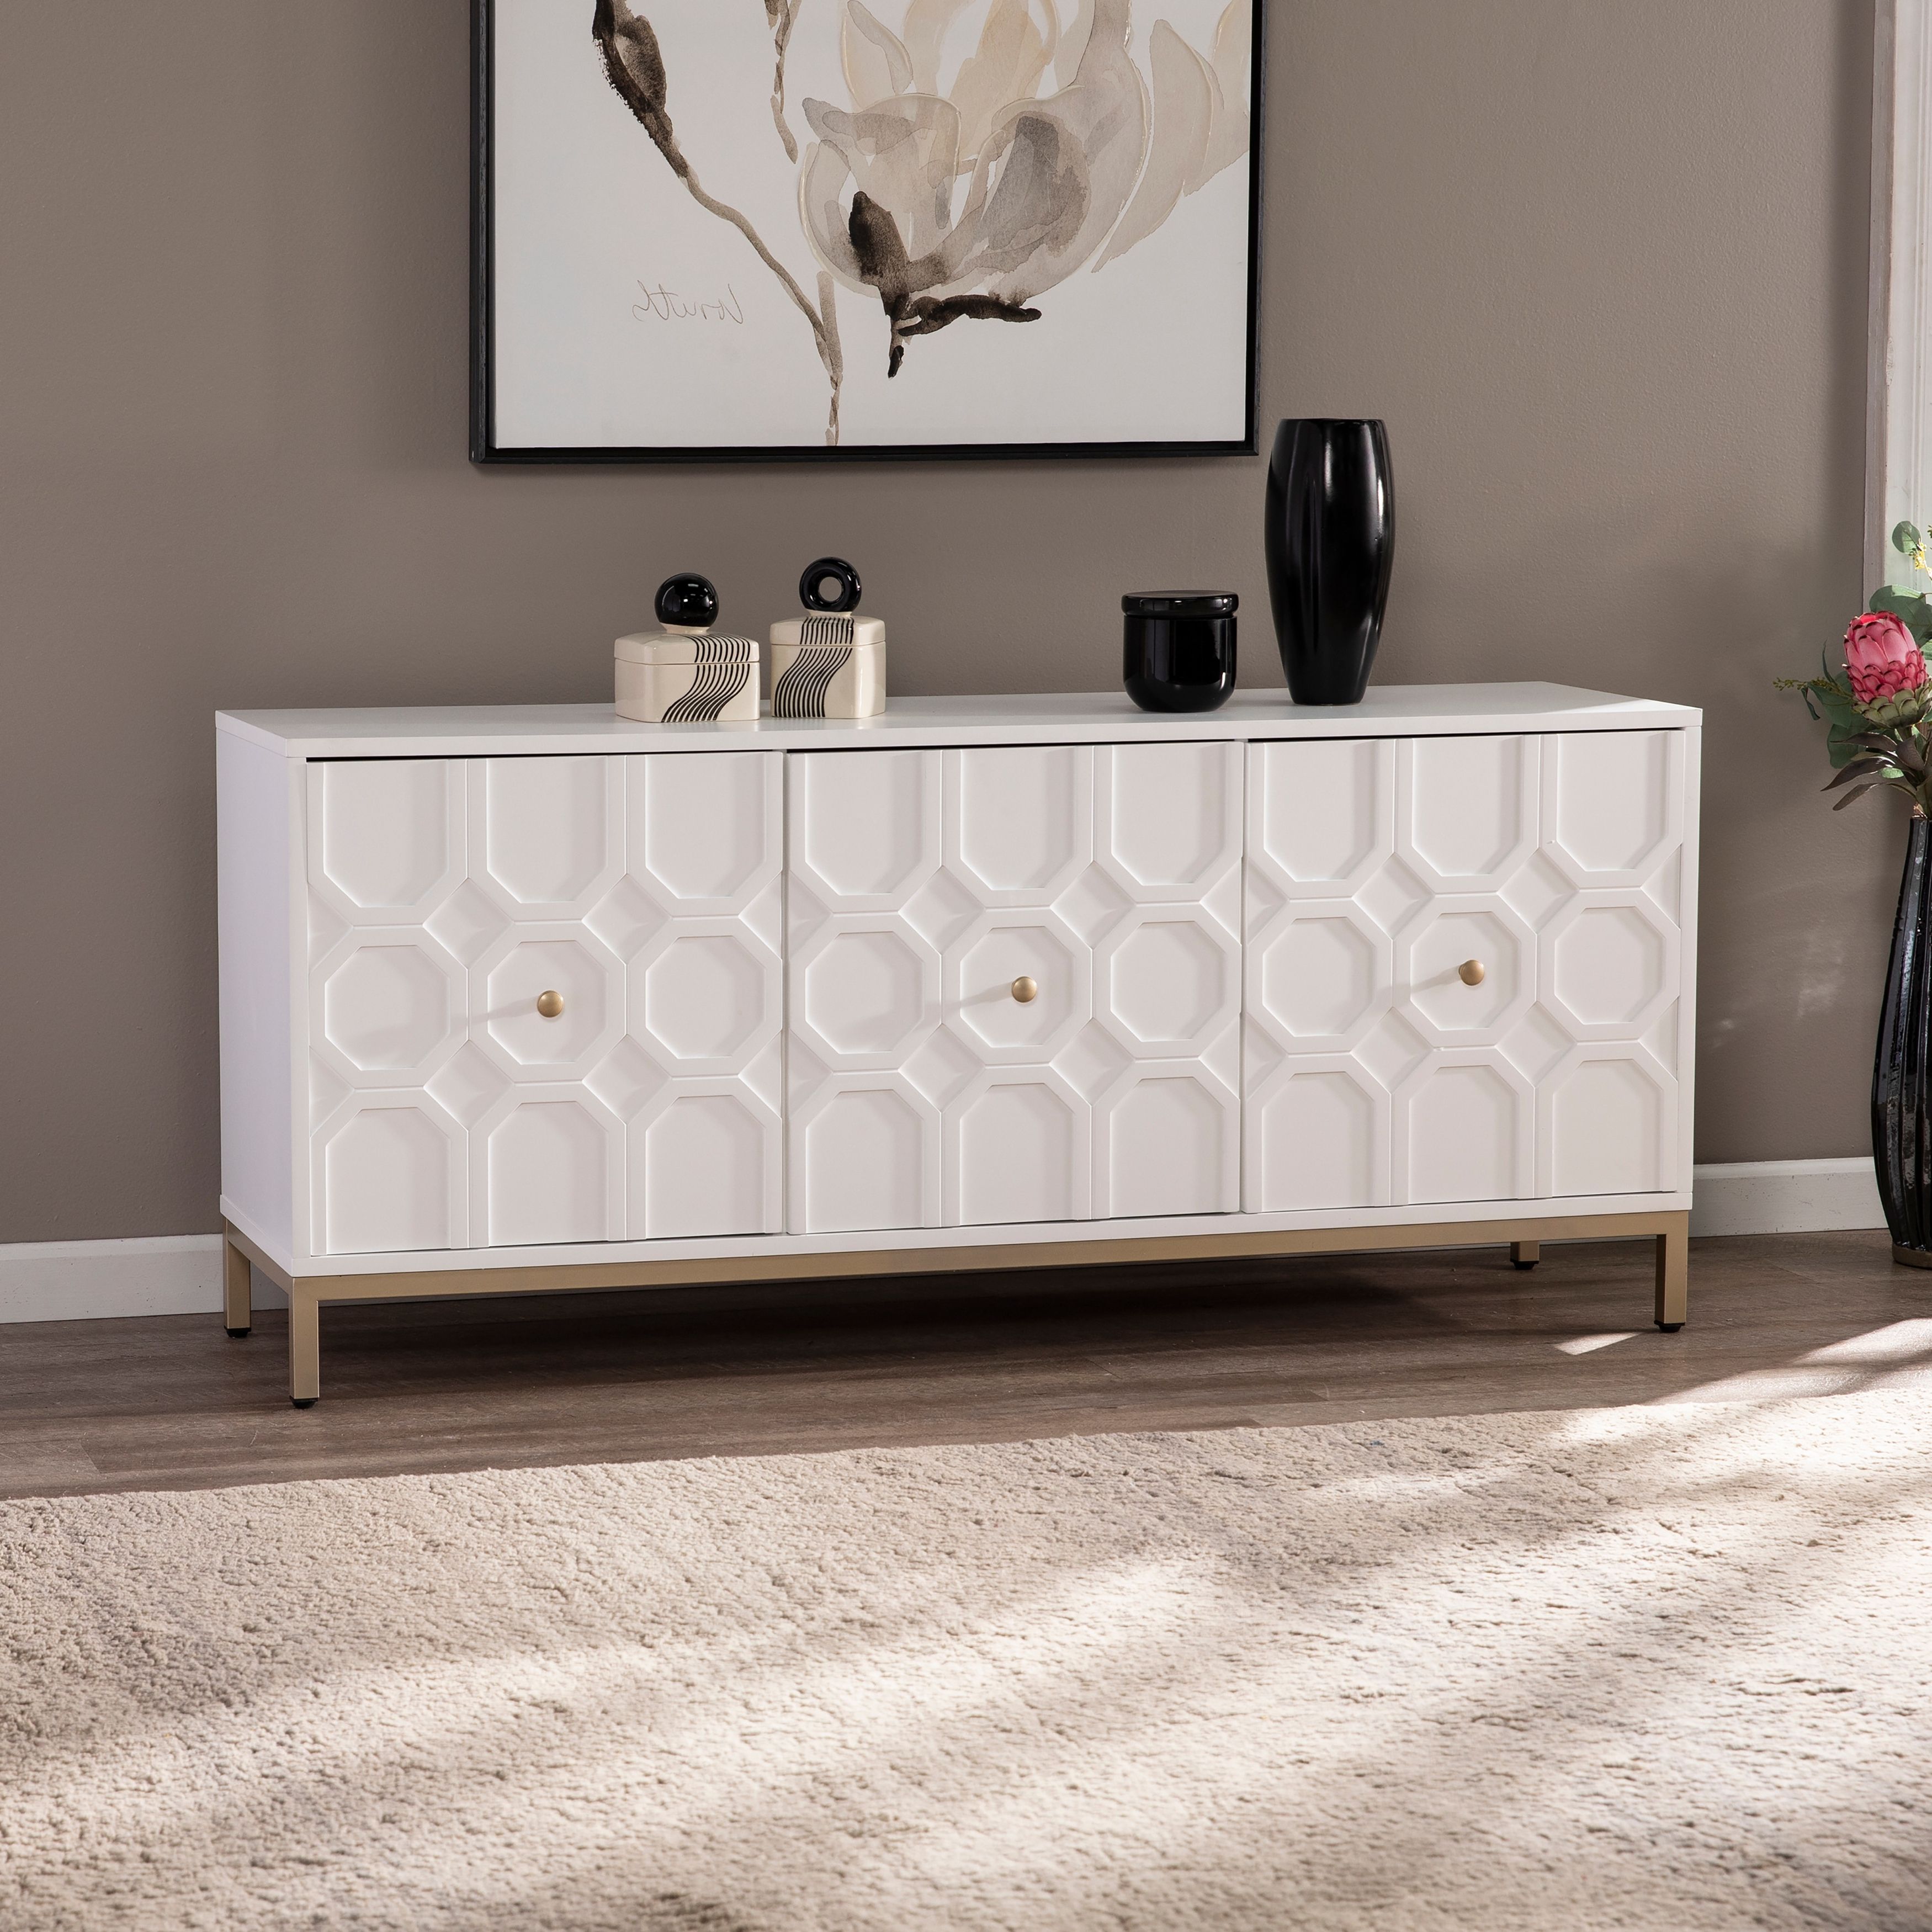 Sei Furniture Gliday Contemporary White Wood 3 Door Buffet Sideboard Accent  Cabinet – On Sale – Bed Bath & Beyond – 30217877 Intended For Widely Used Sideboards Accent Cabinet (View 7 of 10)